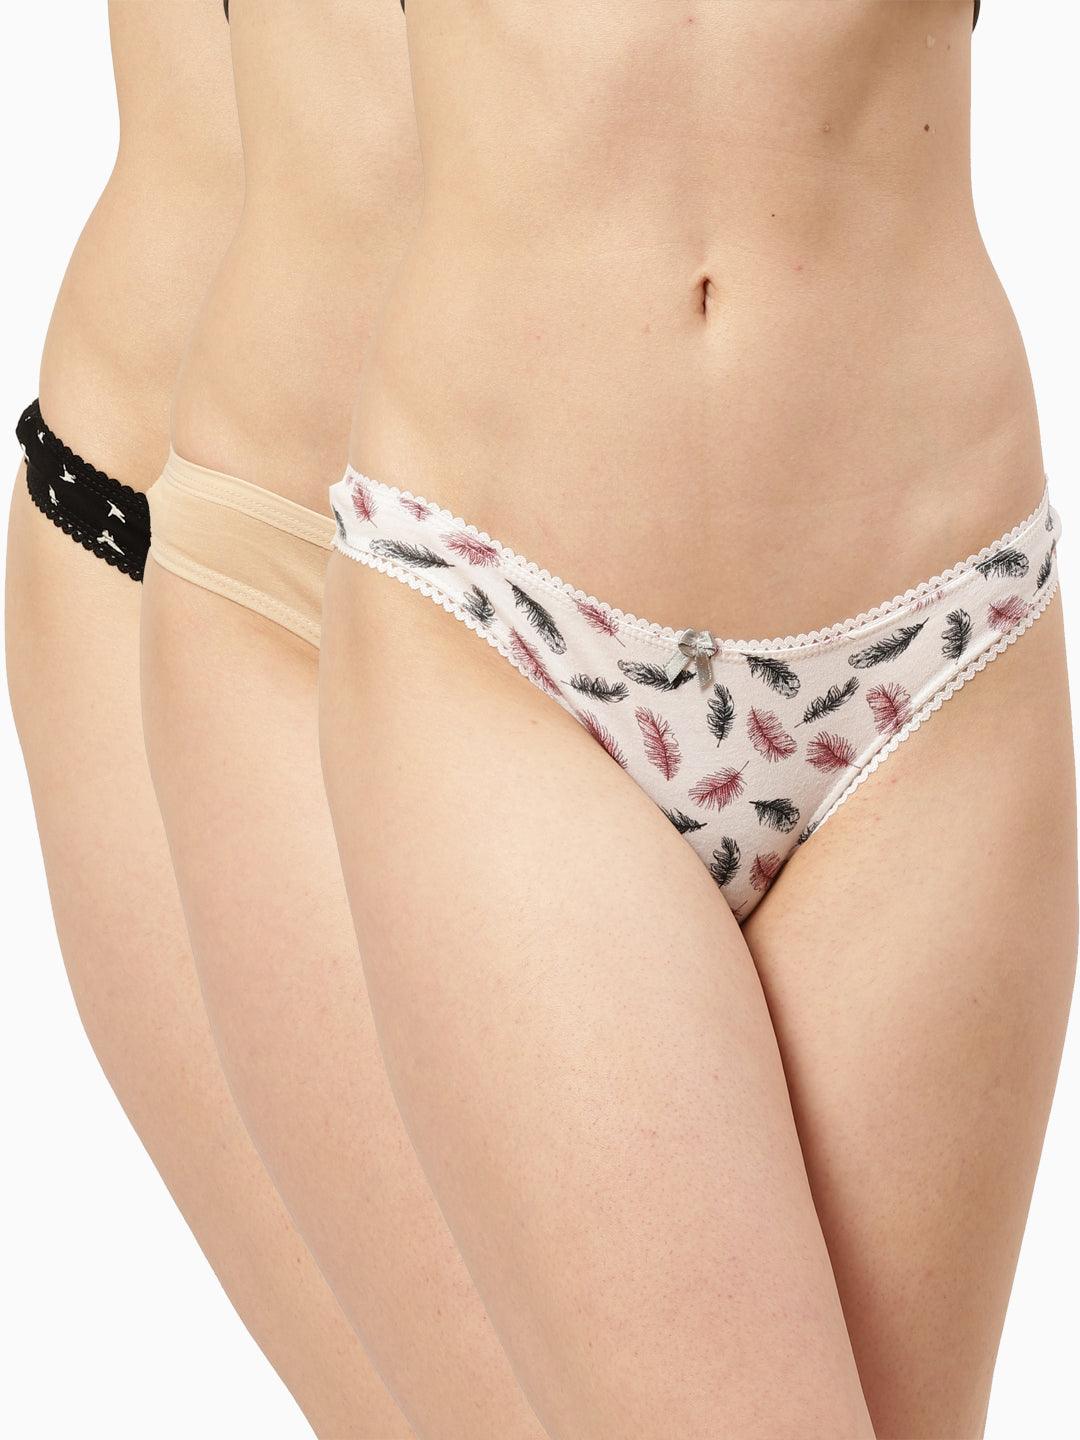 3 pack Women's Ultrasoft Lace Thong Panties, Buy online India on Sale